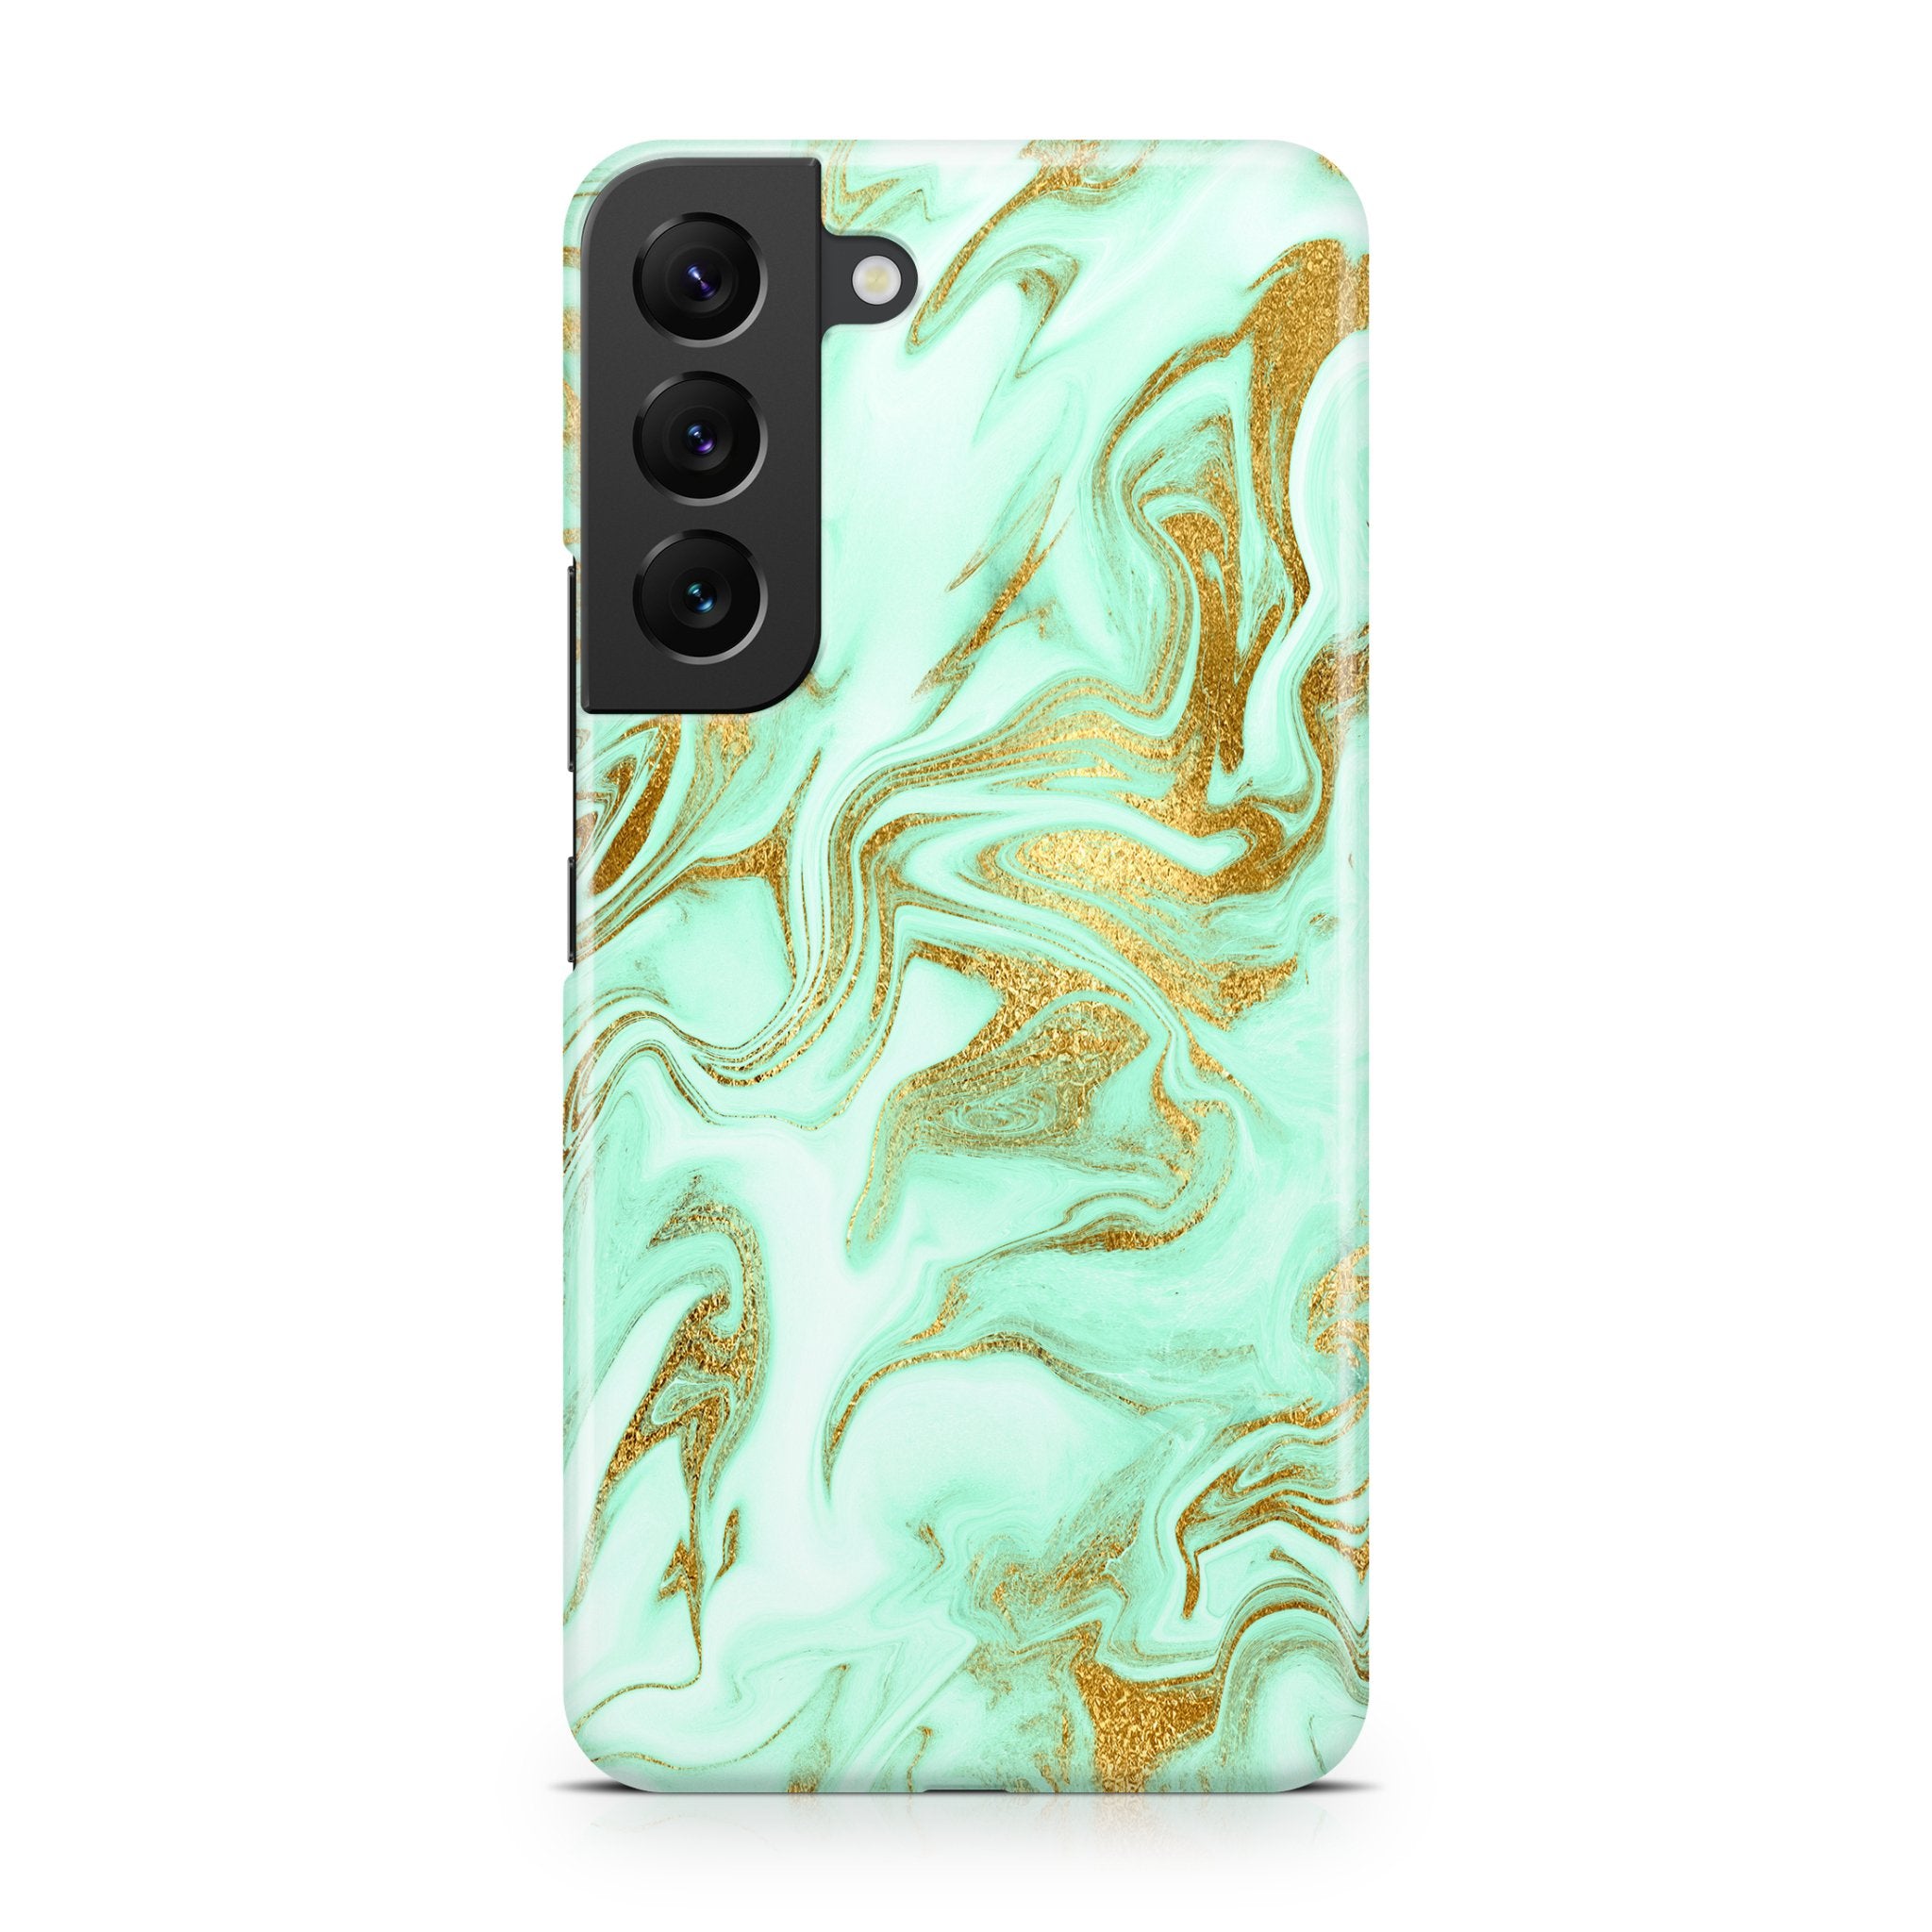 Mint Gold Marble - Samsung phone case designs by CaseSwagger